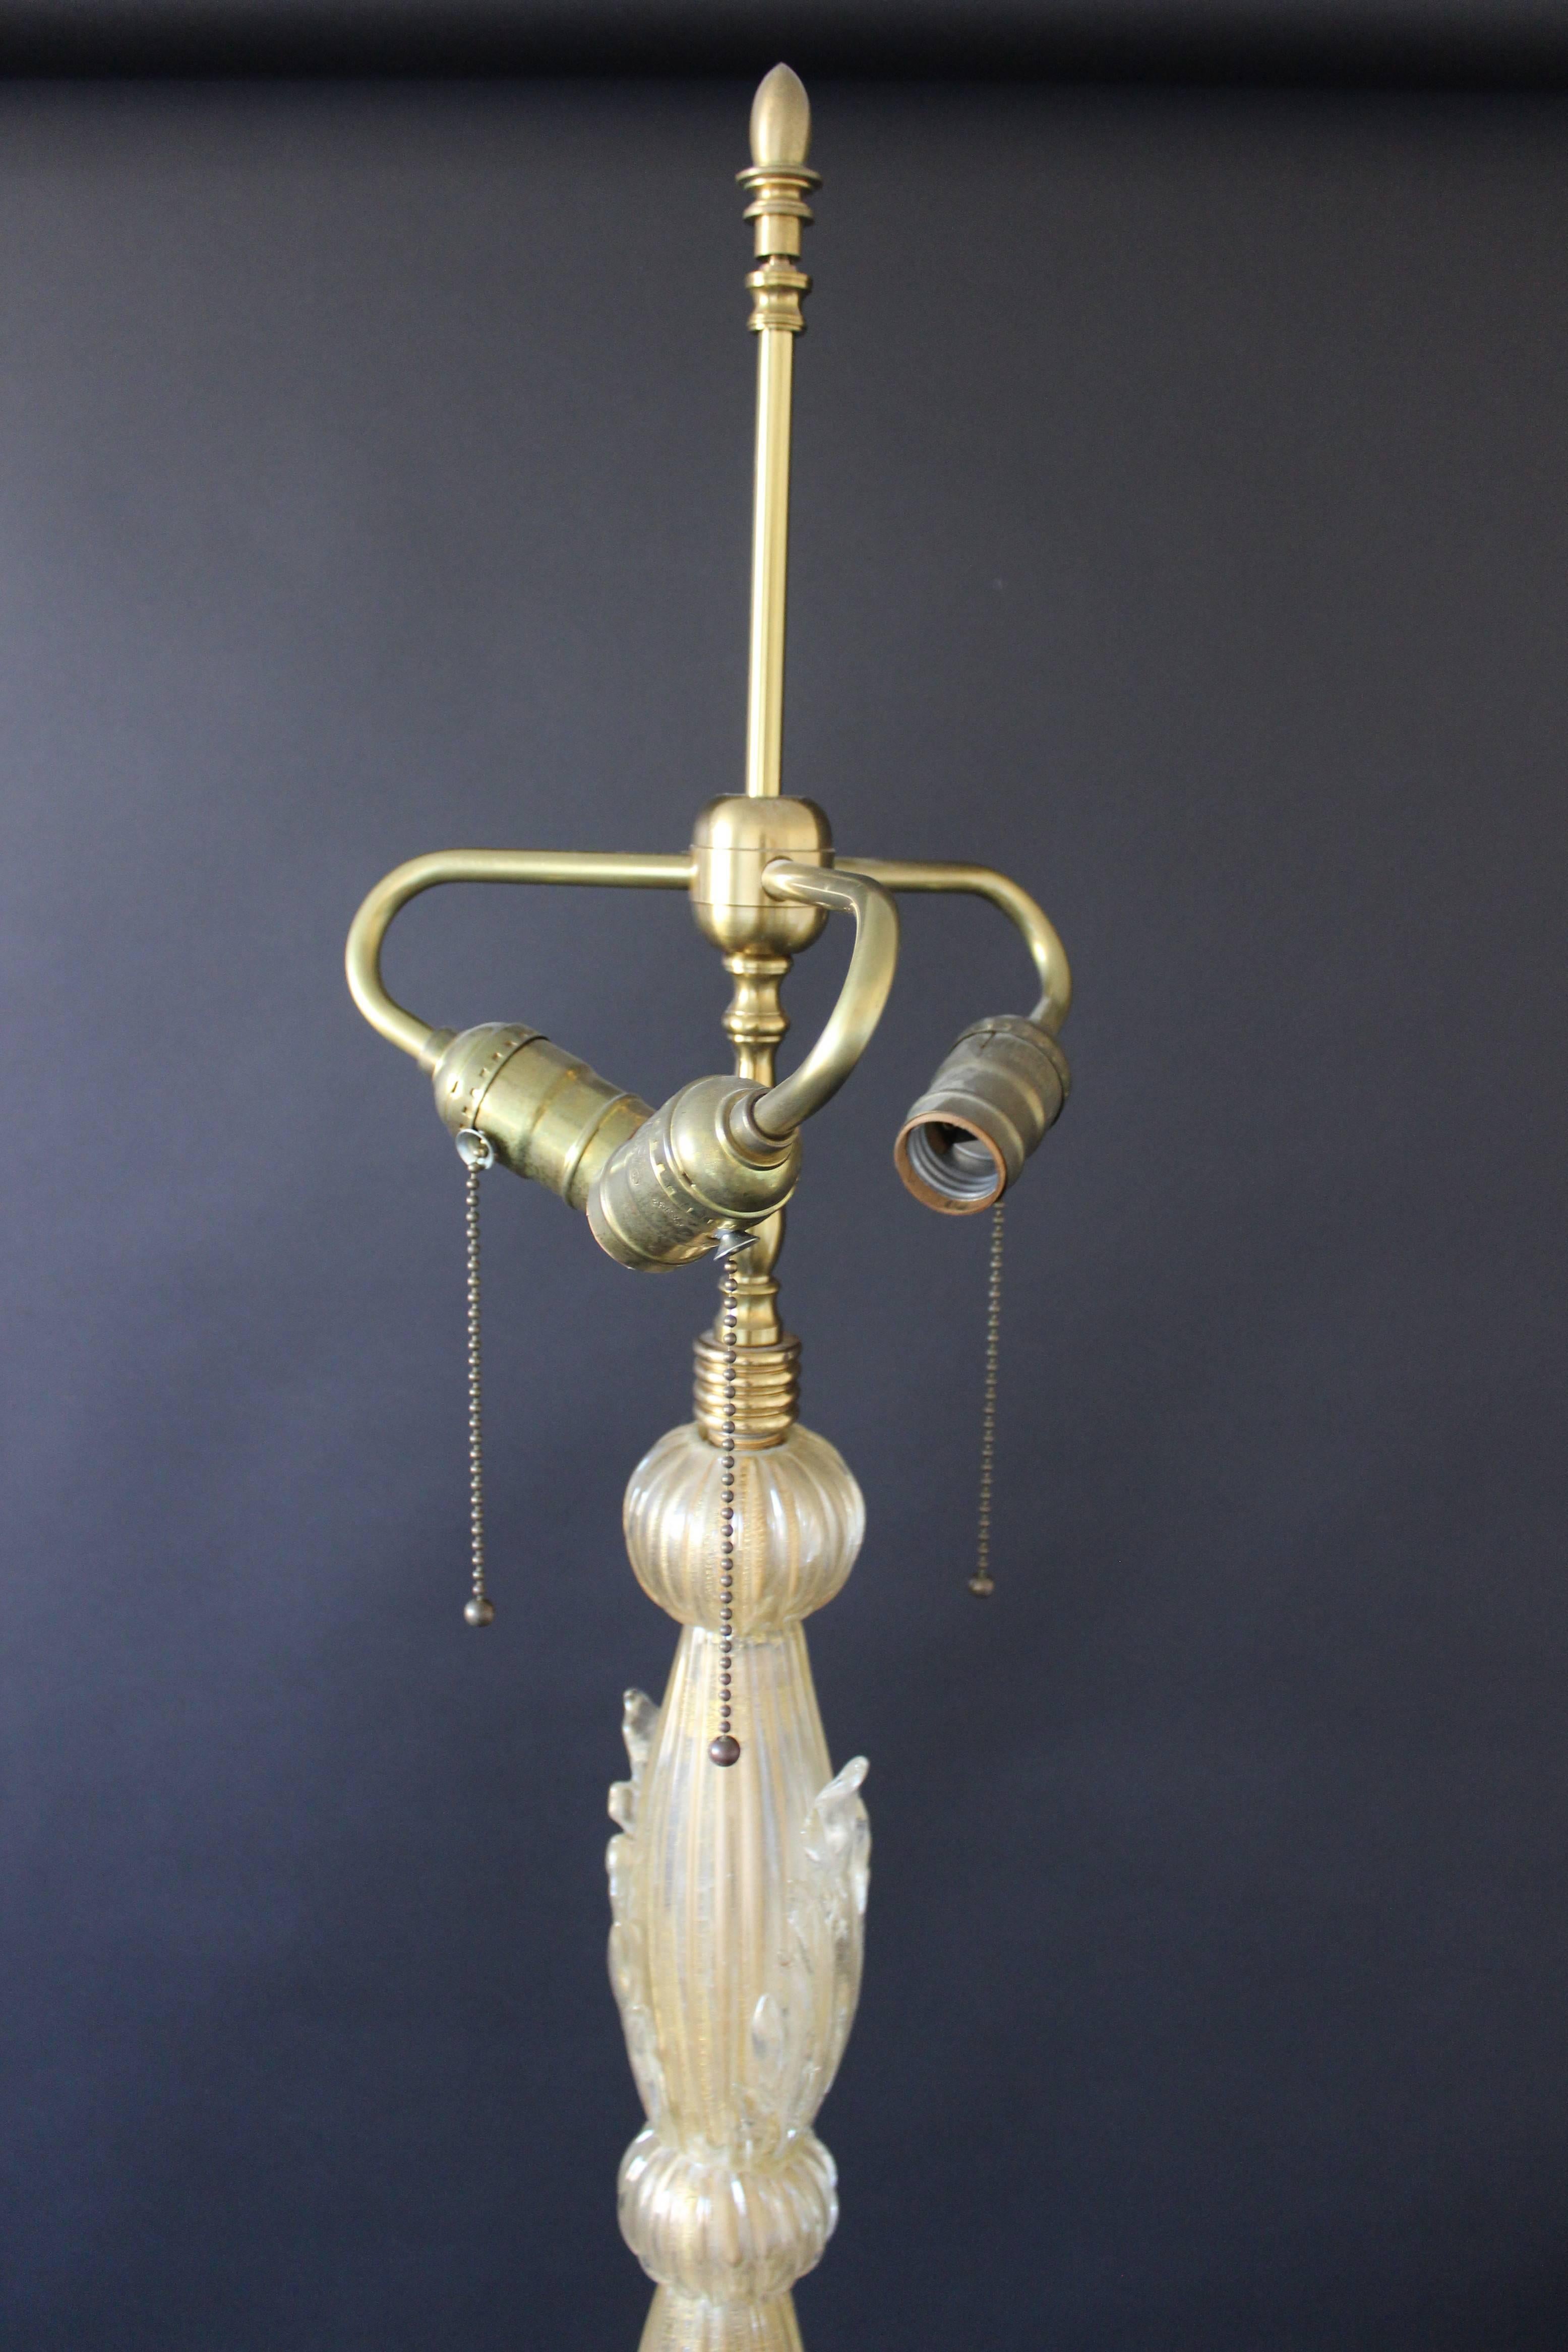 For your consideration is a beautiful, tall Murano floor lamp by Barovier and Toso circa 1930-1940s. Rare applied leaf decorations. In excellent condition. The dimensions are 15